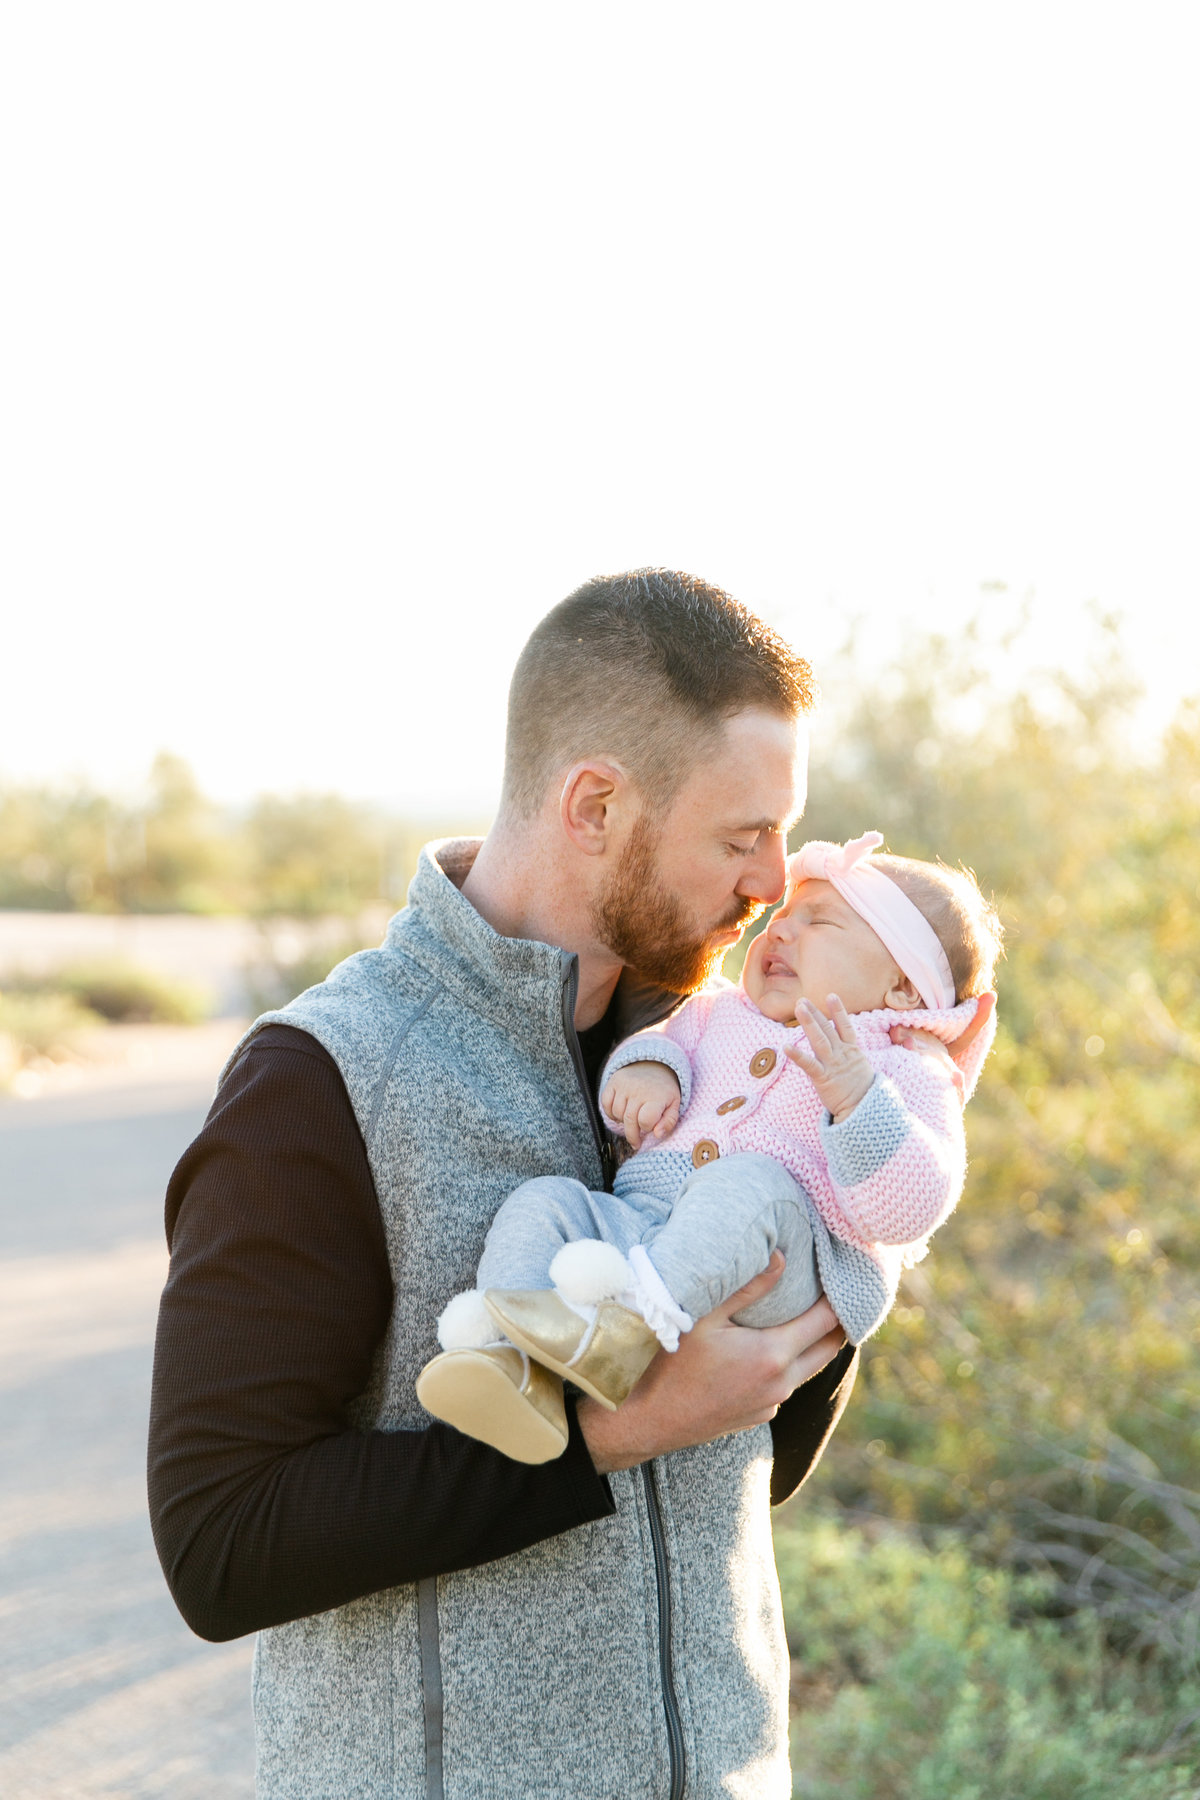 Karlie Colleen Photography - Scottsdale Family Photography - Lauren & Family-12